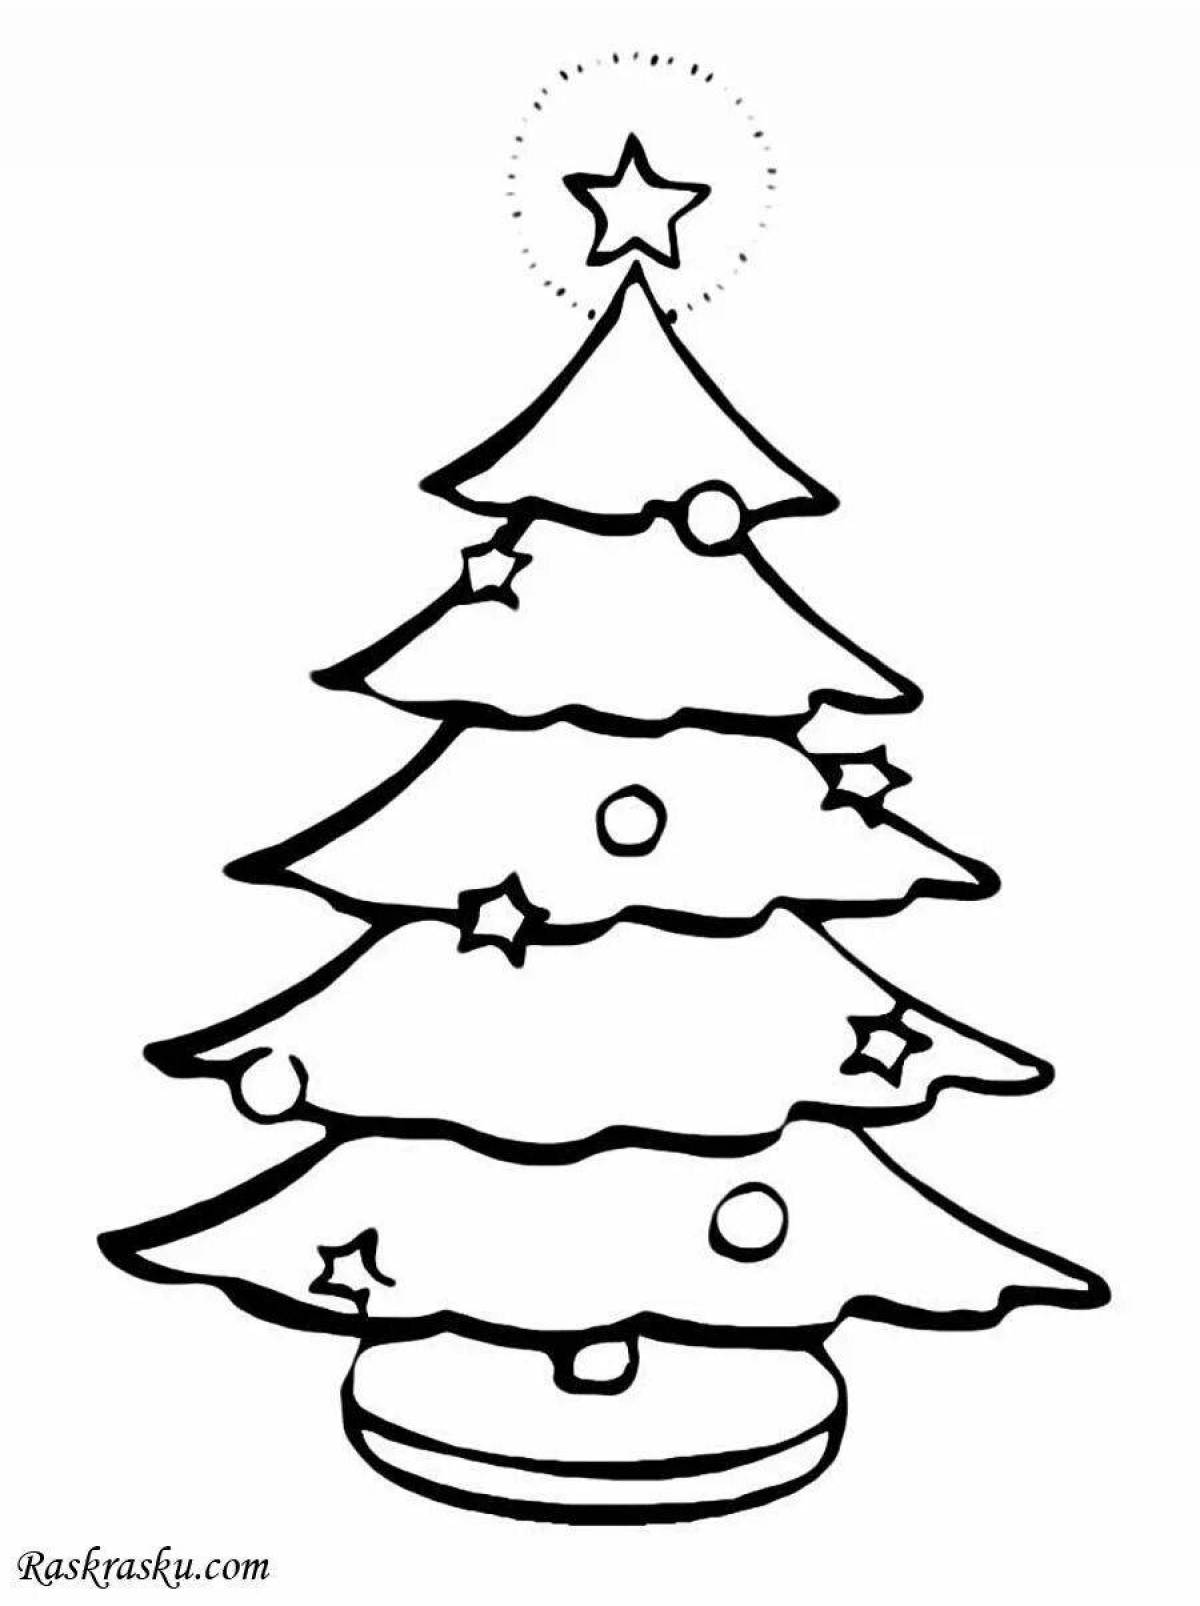 Drawing of a radiant Christmas tree